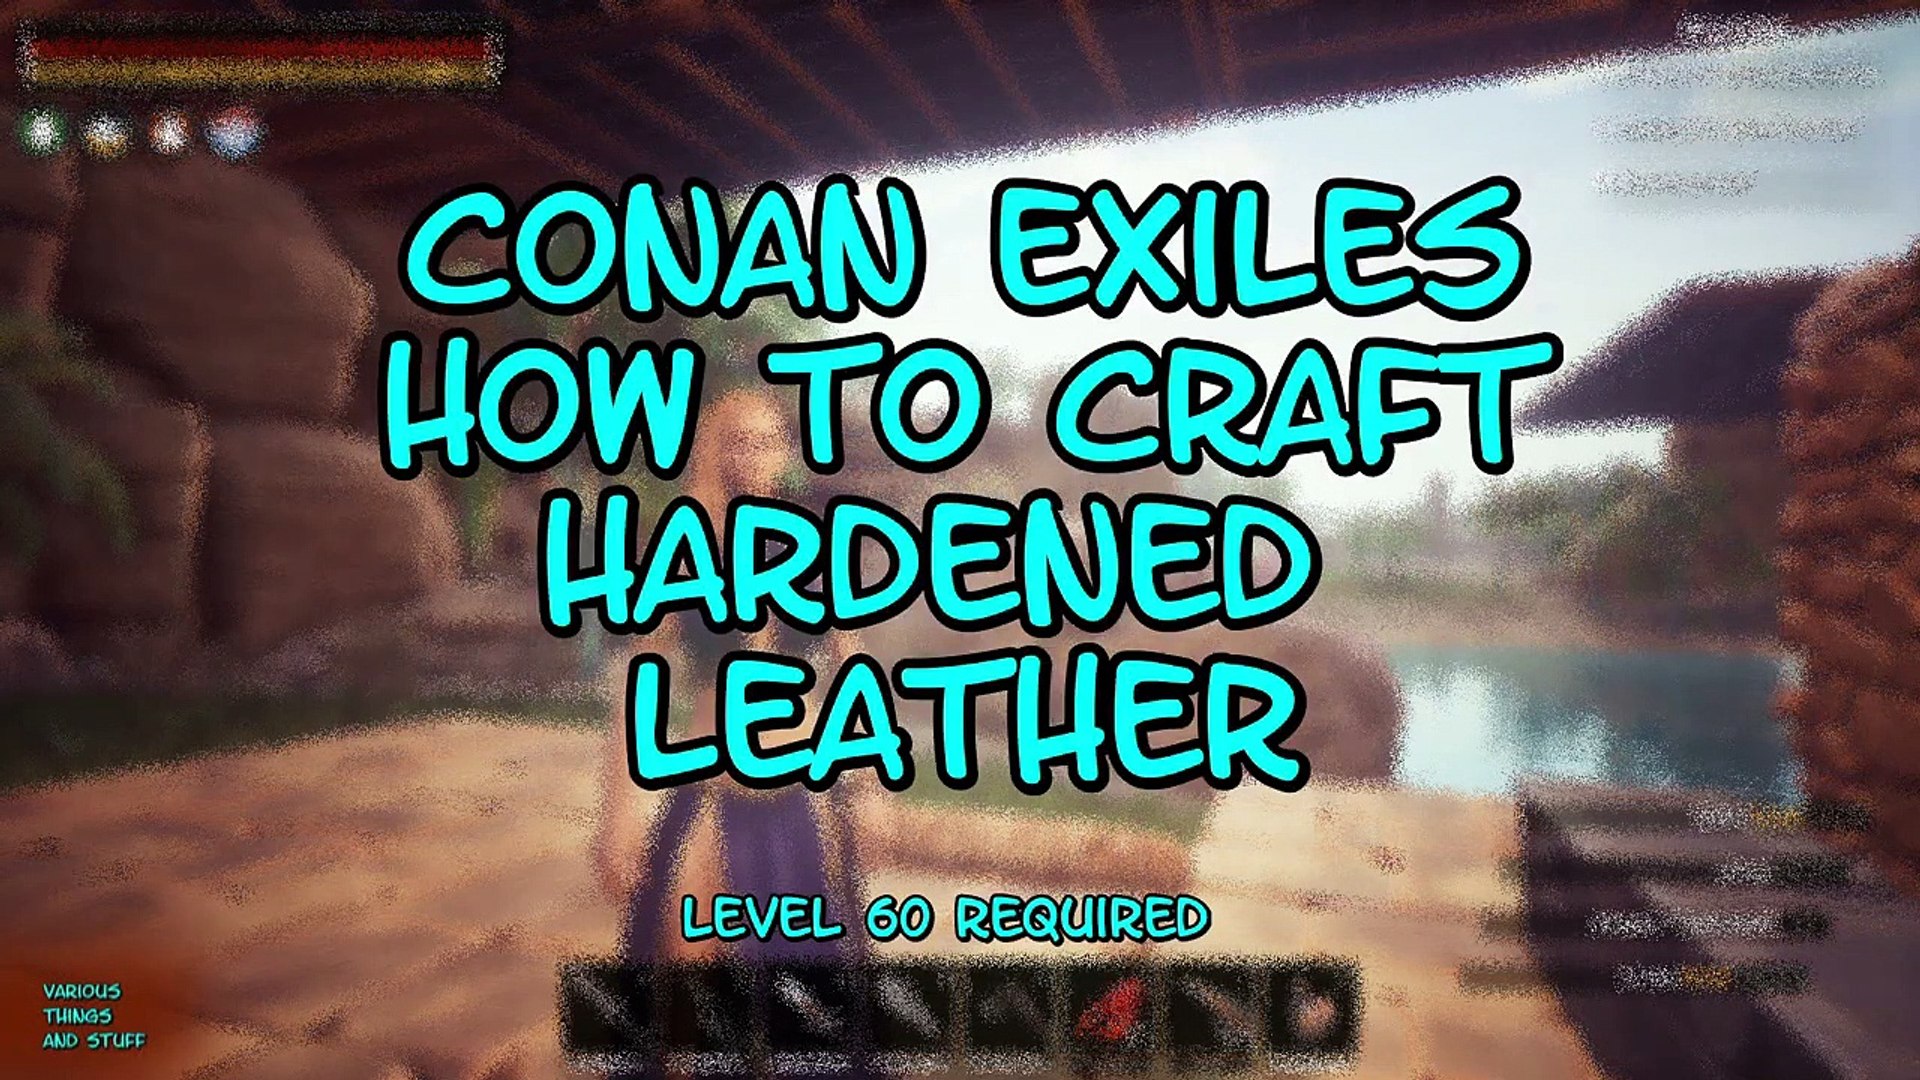 Conan Exiles How to Craft Hardened Leather (UPDATED NOV 16, 2020) - video  Dailymotion